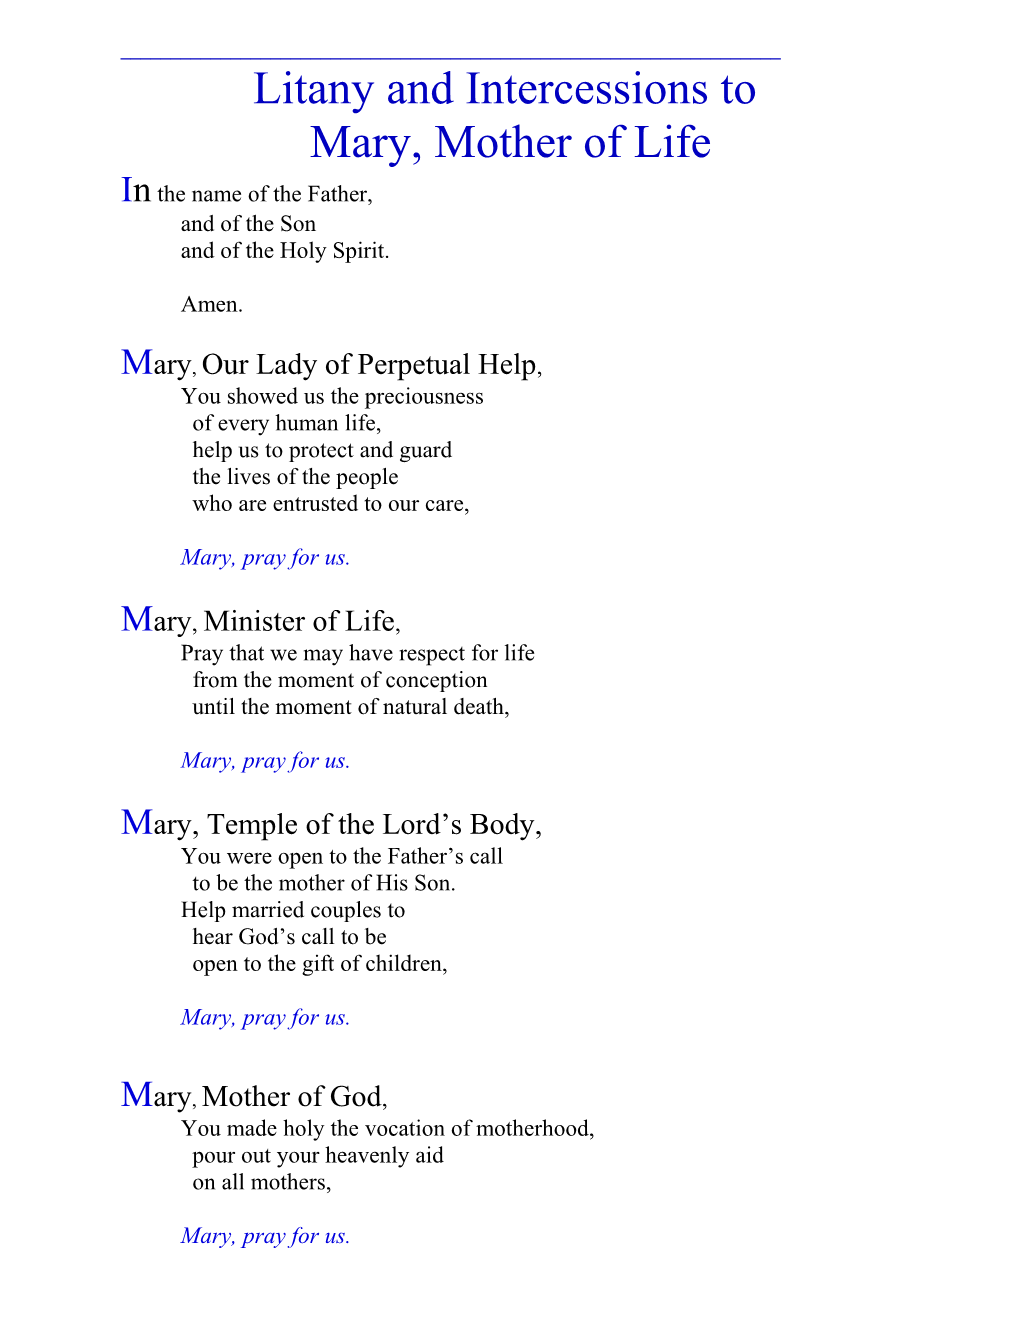 Litany to Mary, Mother of Life